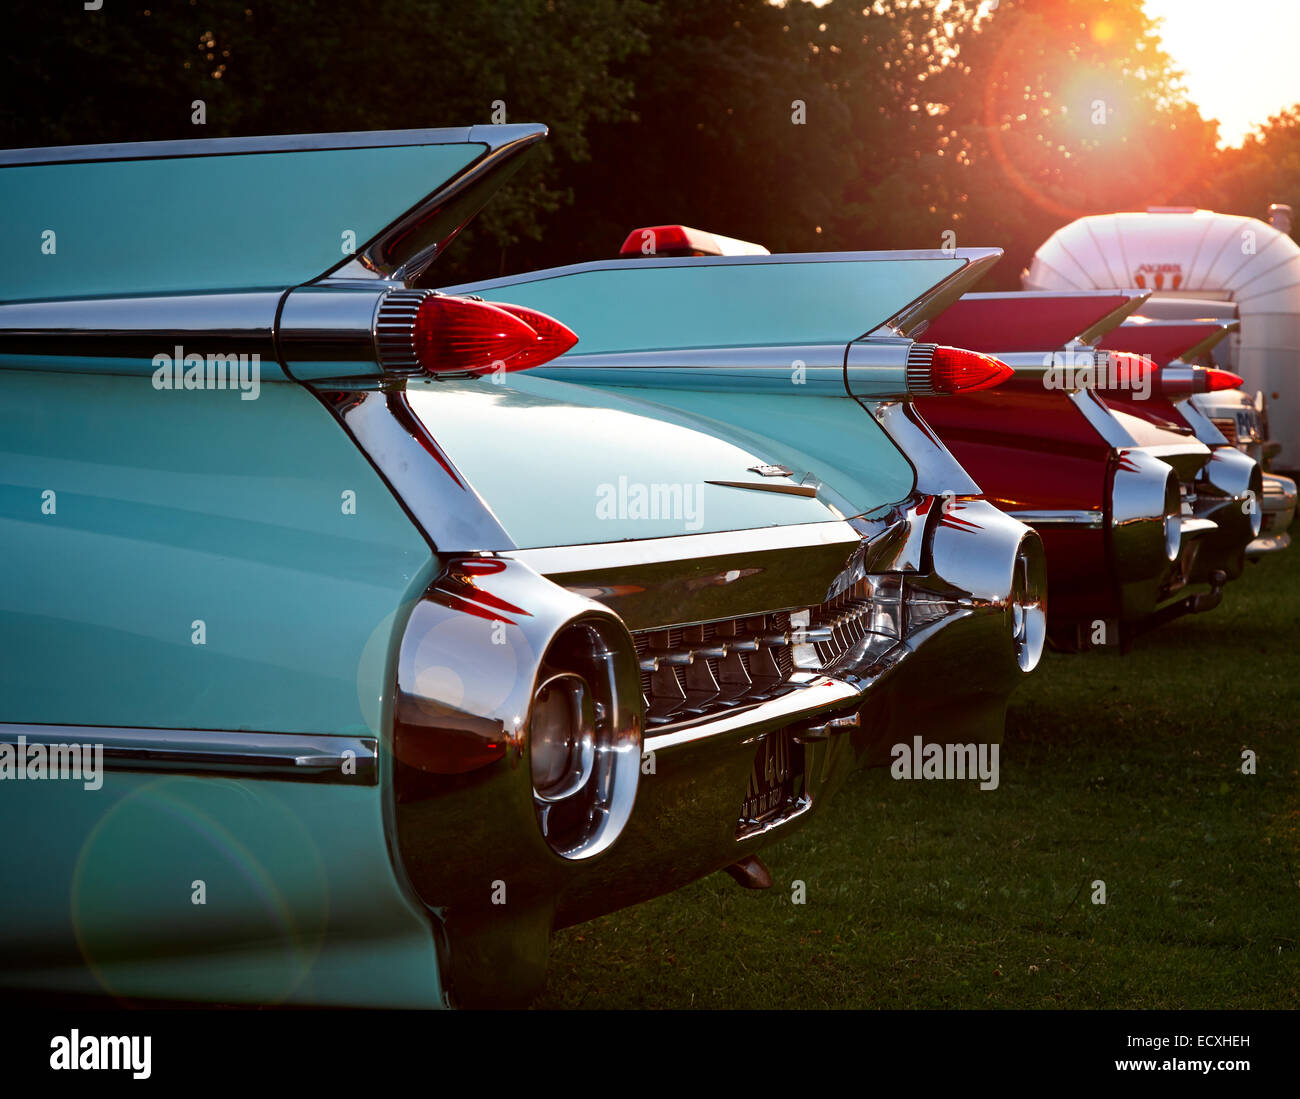 Fins and rear bumpers on two vintage Cadillac Eldorado with American Avion trailer in background with sunburst in sky. Stock Photo